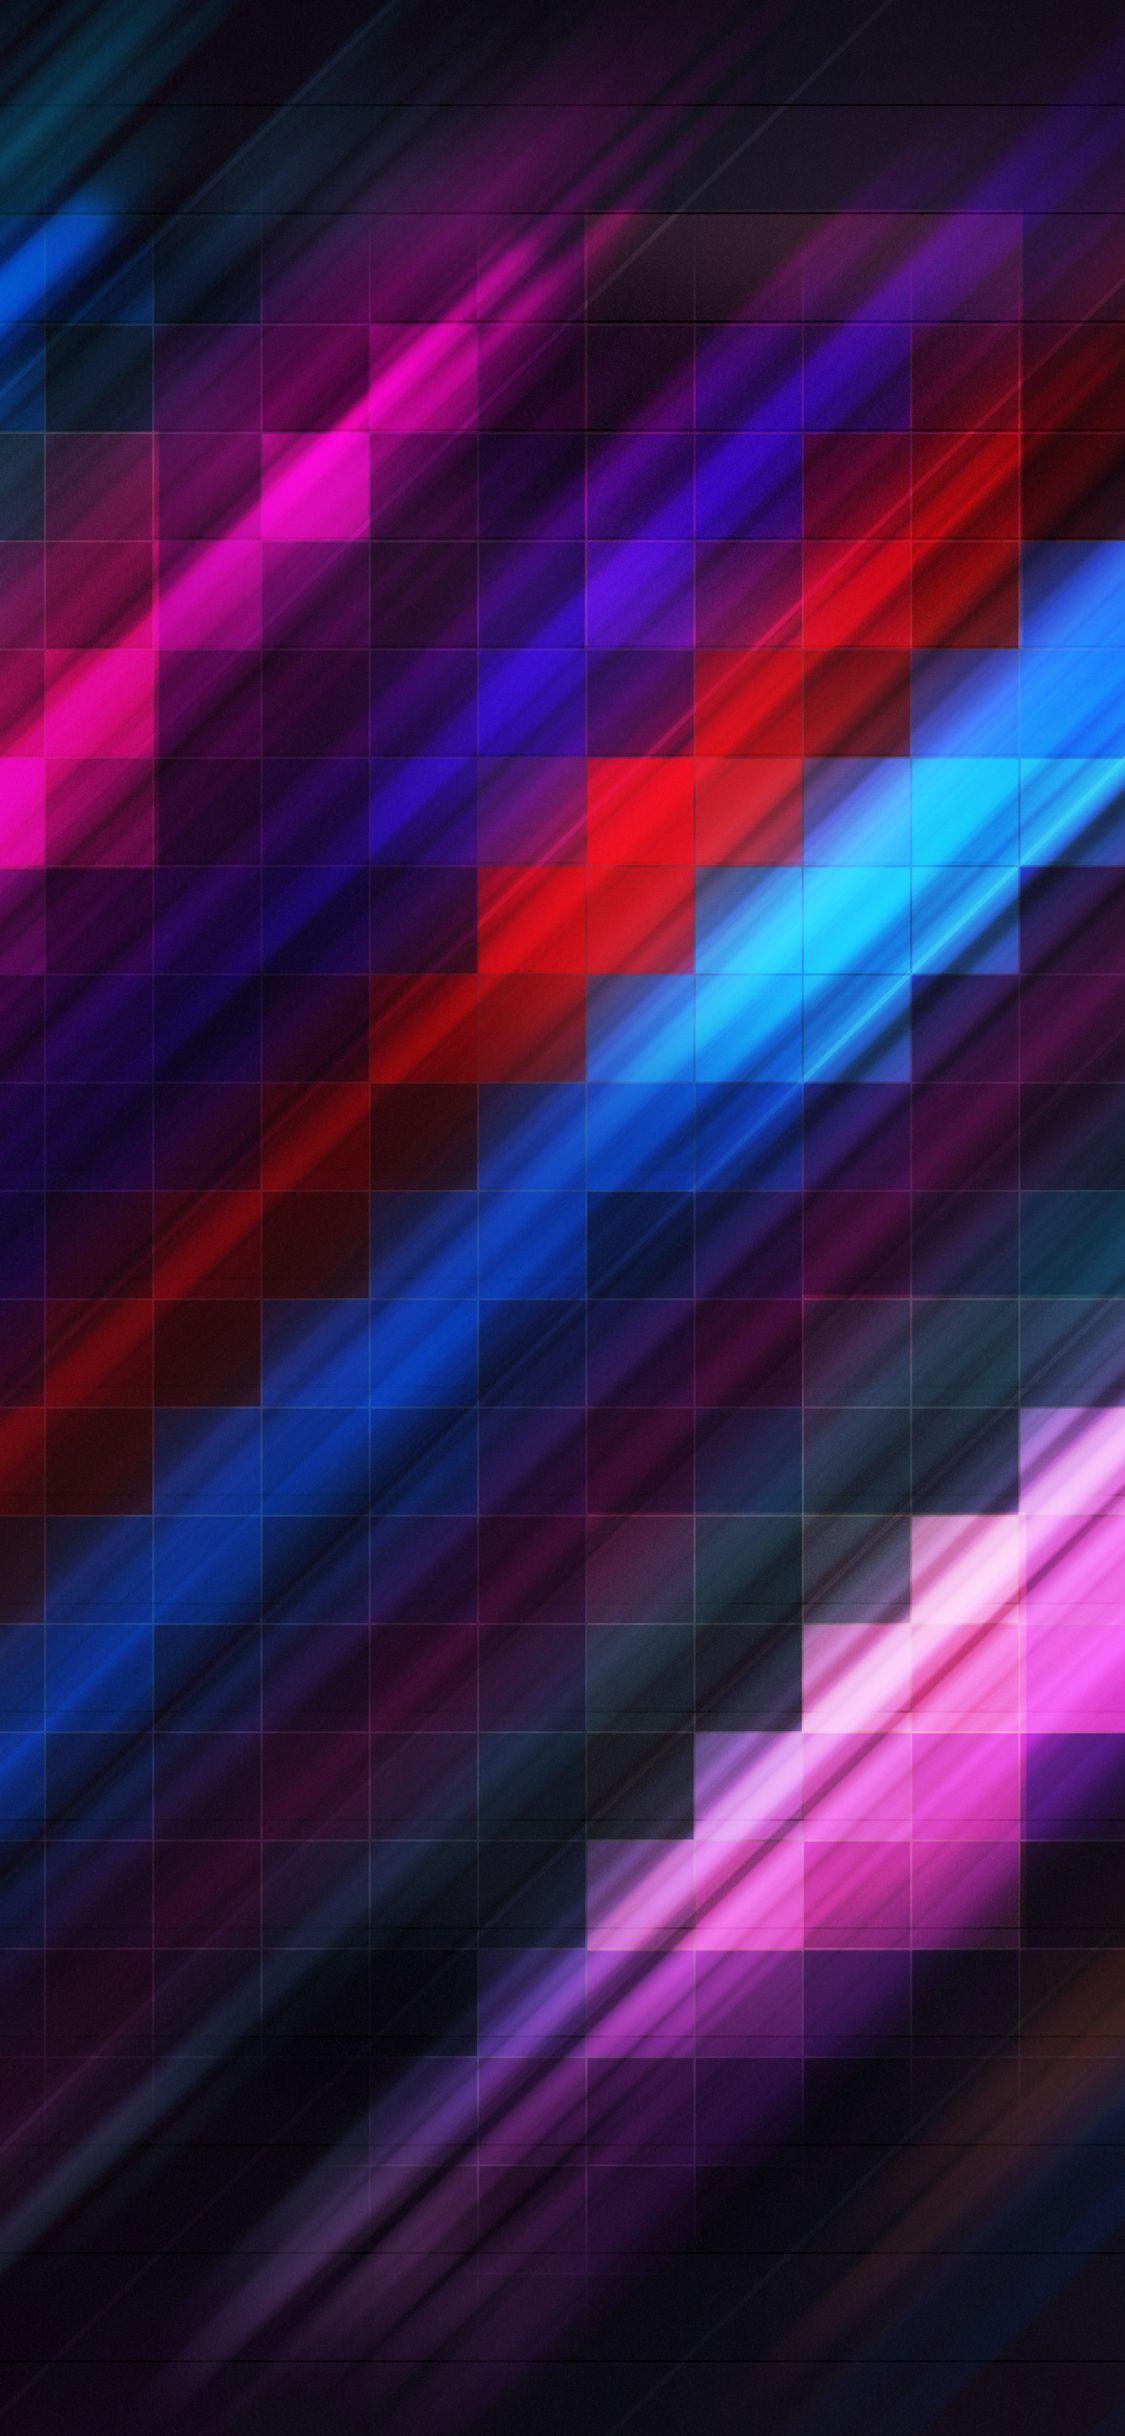 Grid Abstract Colorful 4k In 1125x2436 Resolution. Abstract